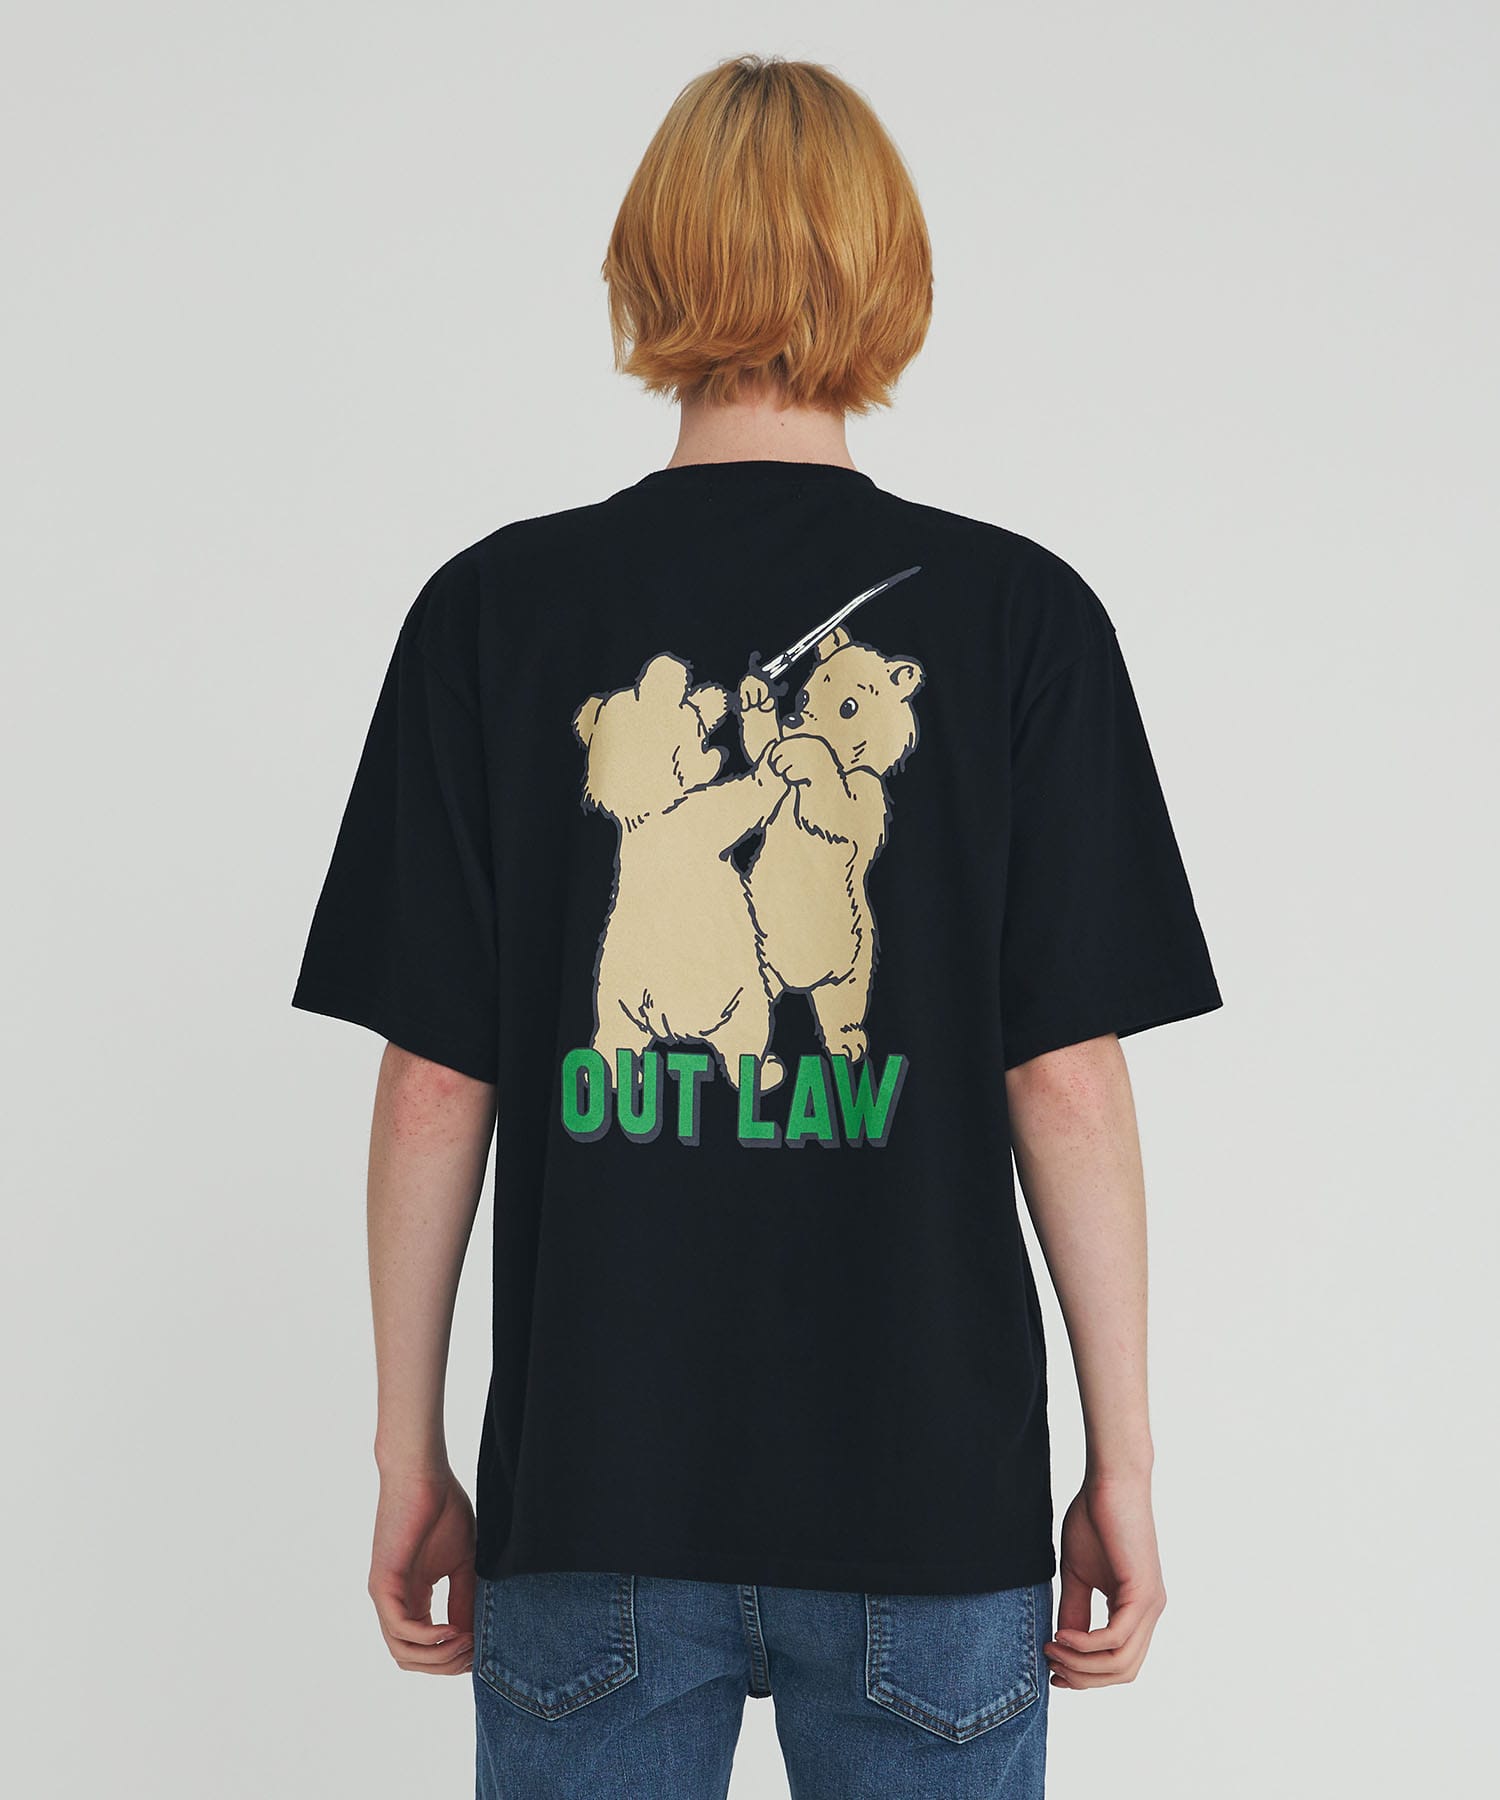 OUT LAW TEE